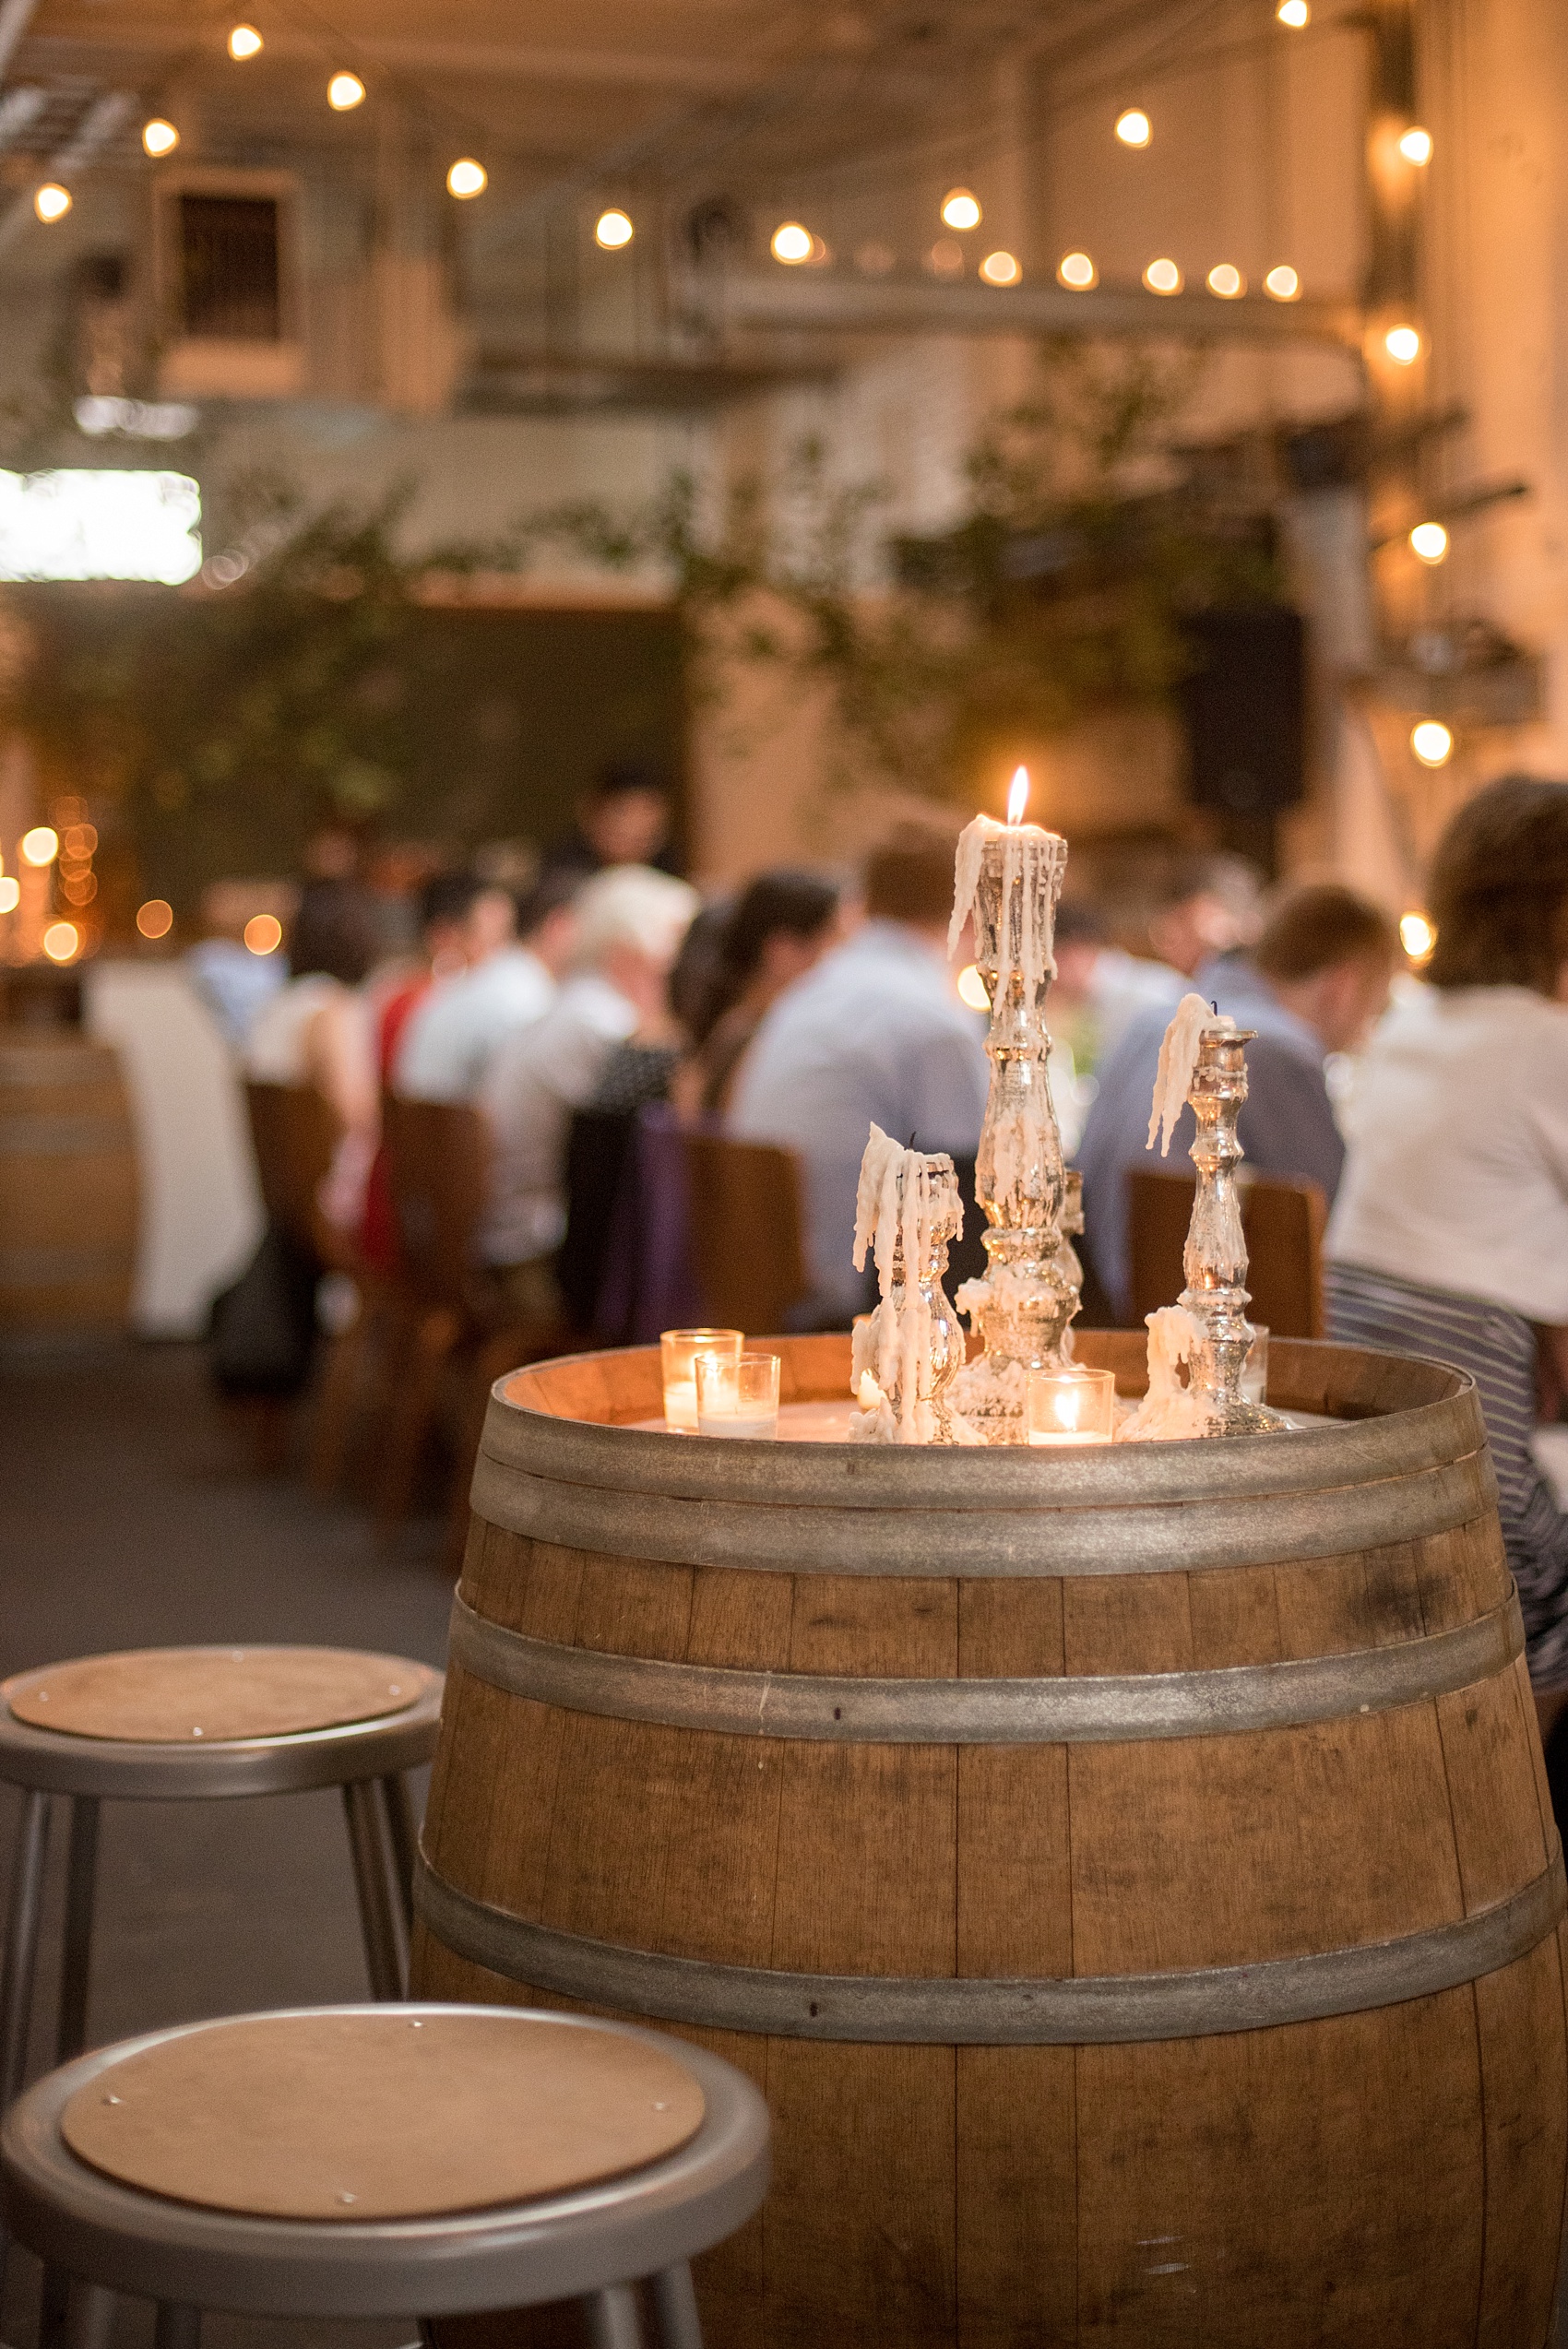 Mikkel Paige Photography photos of a wedding rehearsal dinner at Aterlier Roquette, Brooklyn. A romantic intimate setting for a small gathering in a warehouse district with an outside courtyard and candlelight.